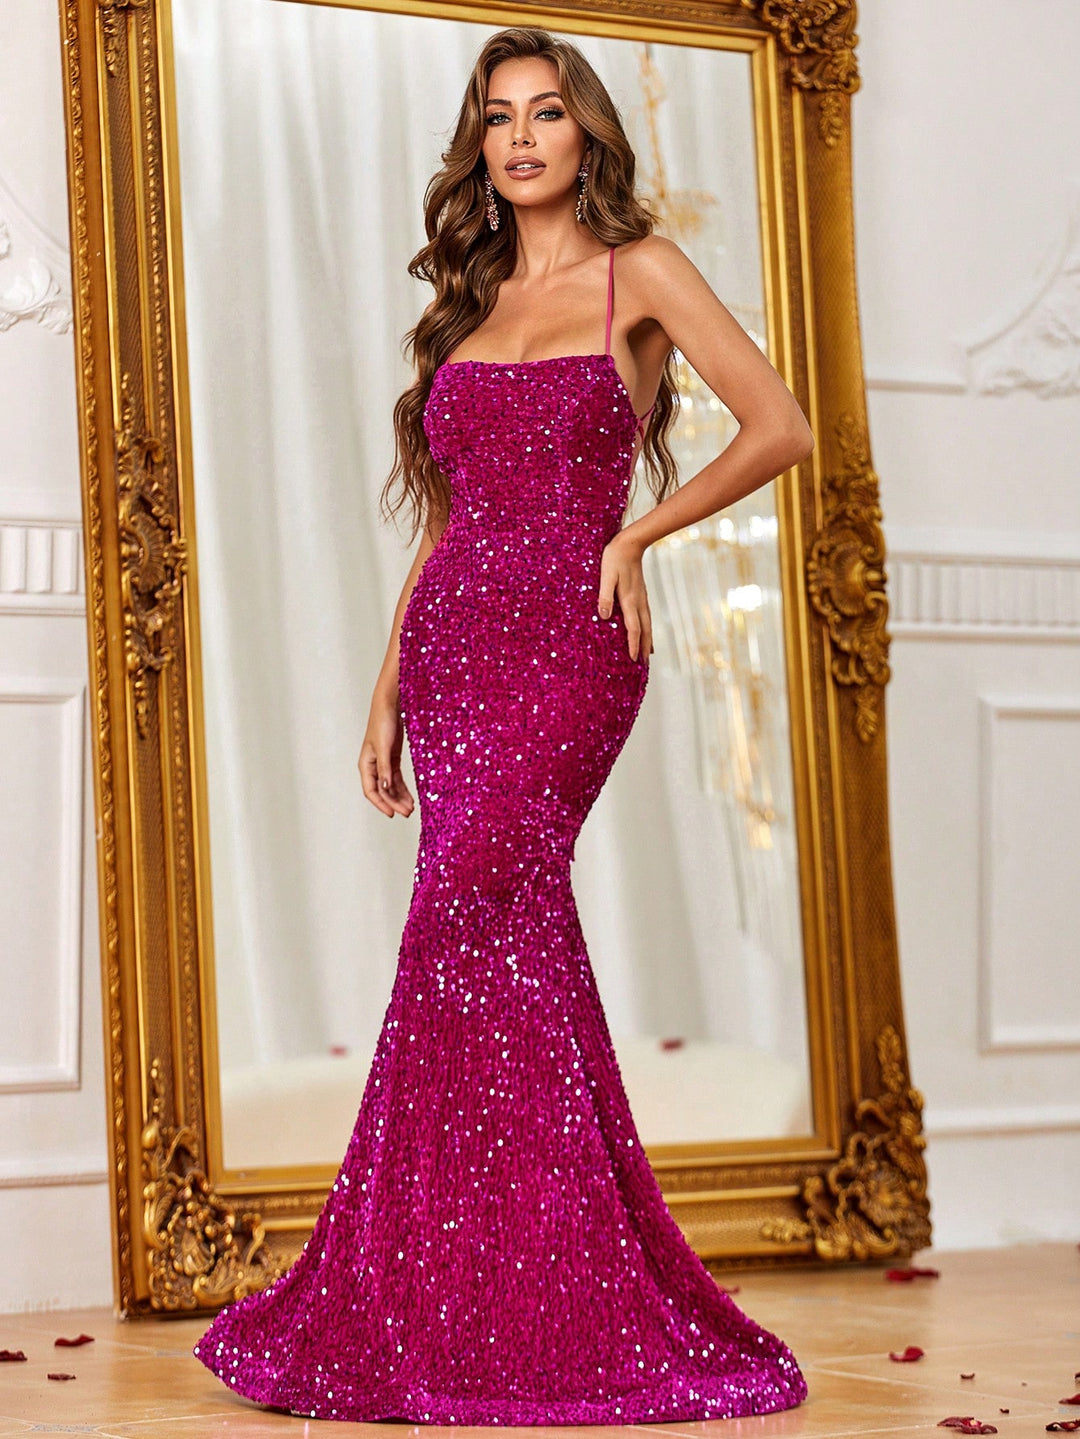 Spaghetti Strap Lace Up Back Sequin Mermaid Dress